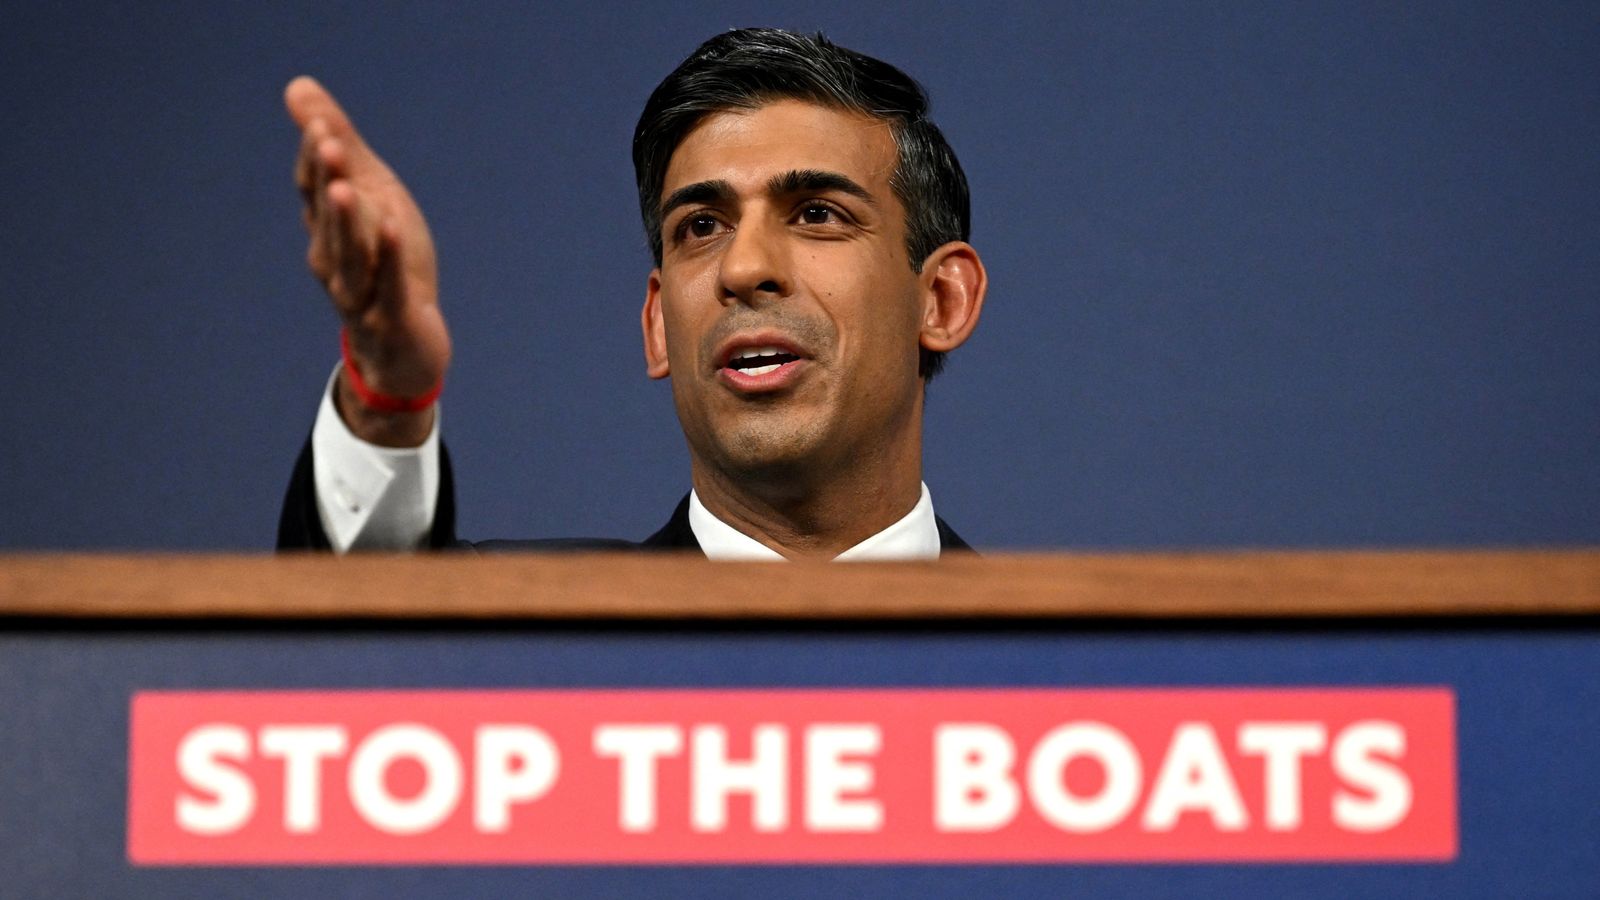 Rishi Sunak talks tough on immigration but the 'stop the boats' slogan is not as straightforward as it seems